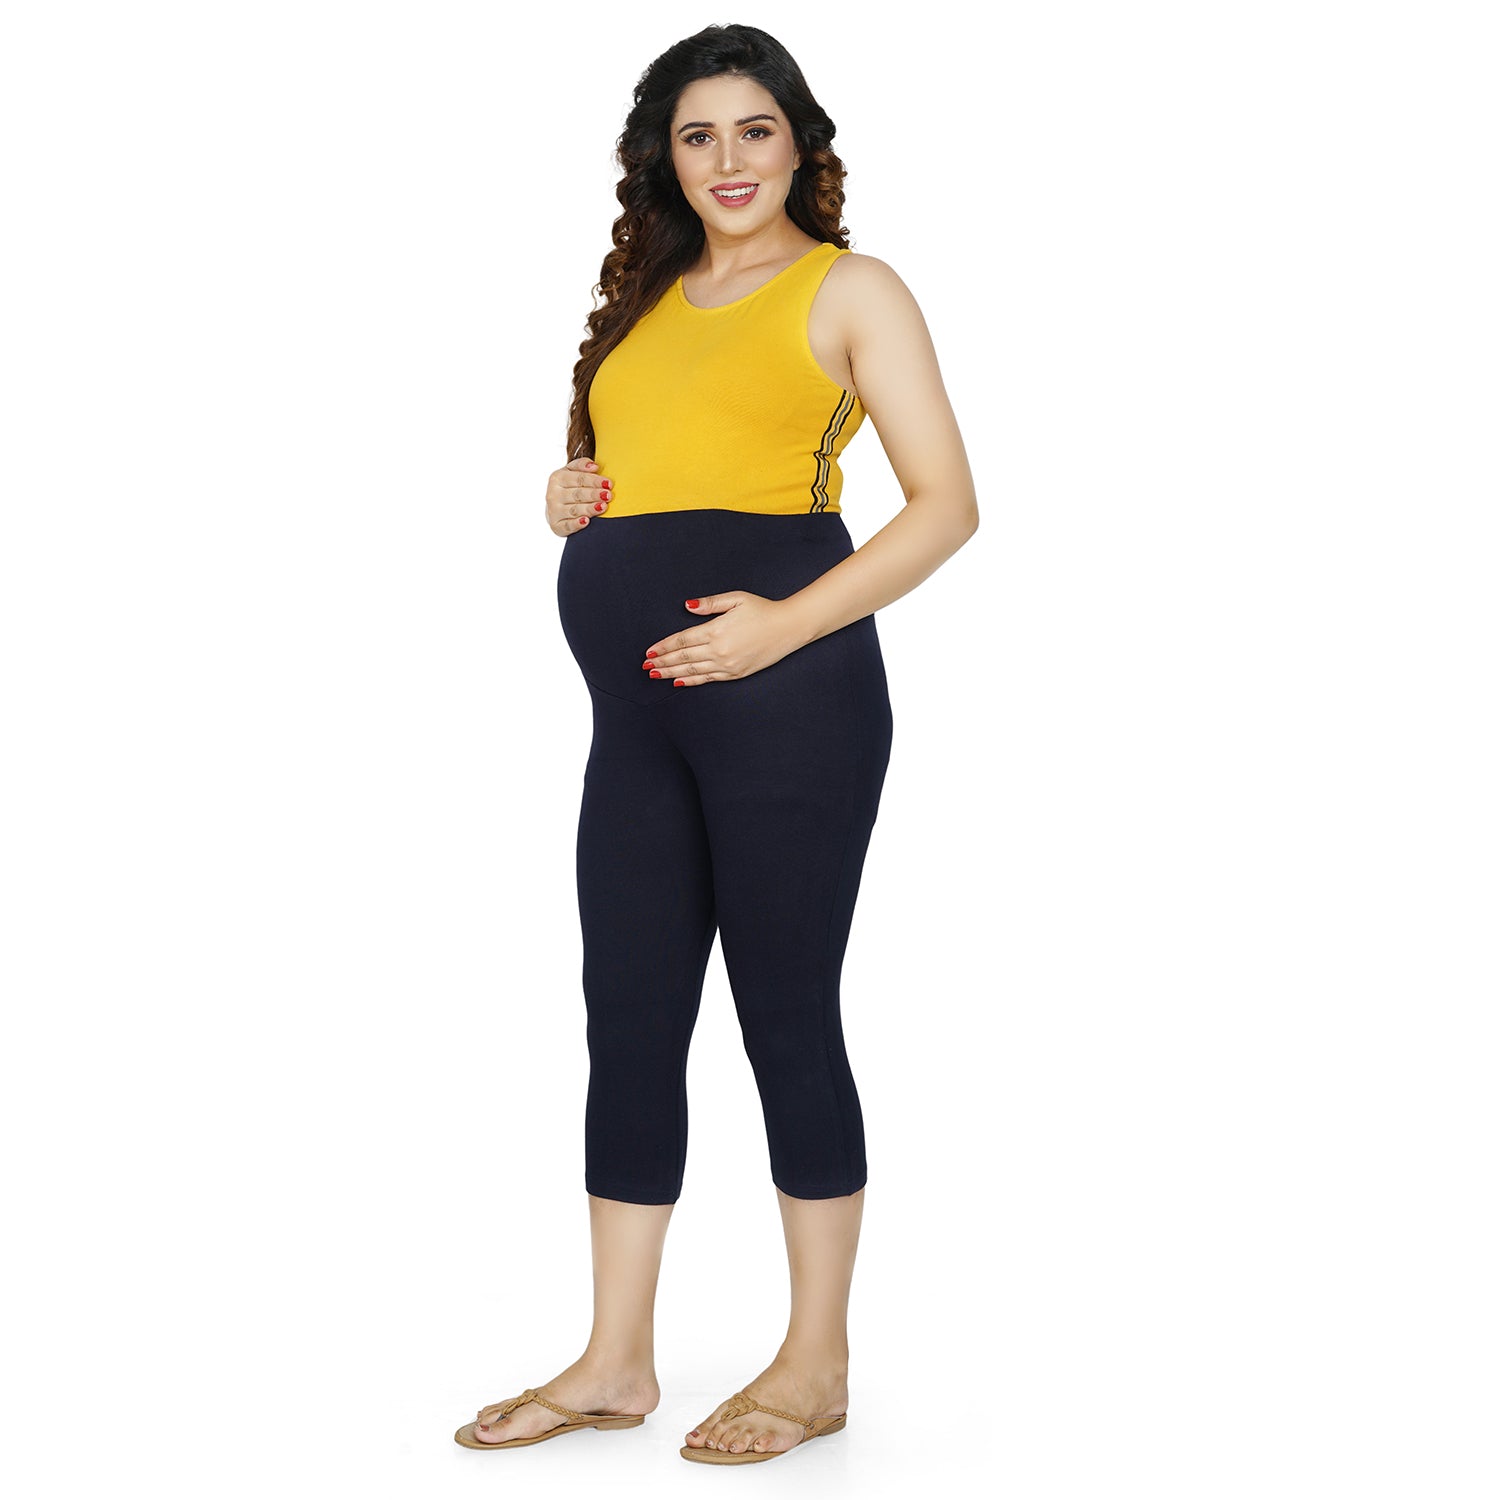 Baby Moo Soft And Comfy Mid-Calf Length Maternity Pant Solid - Navy Blue